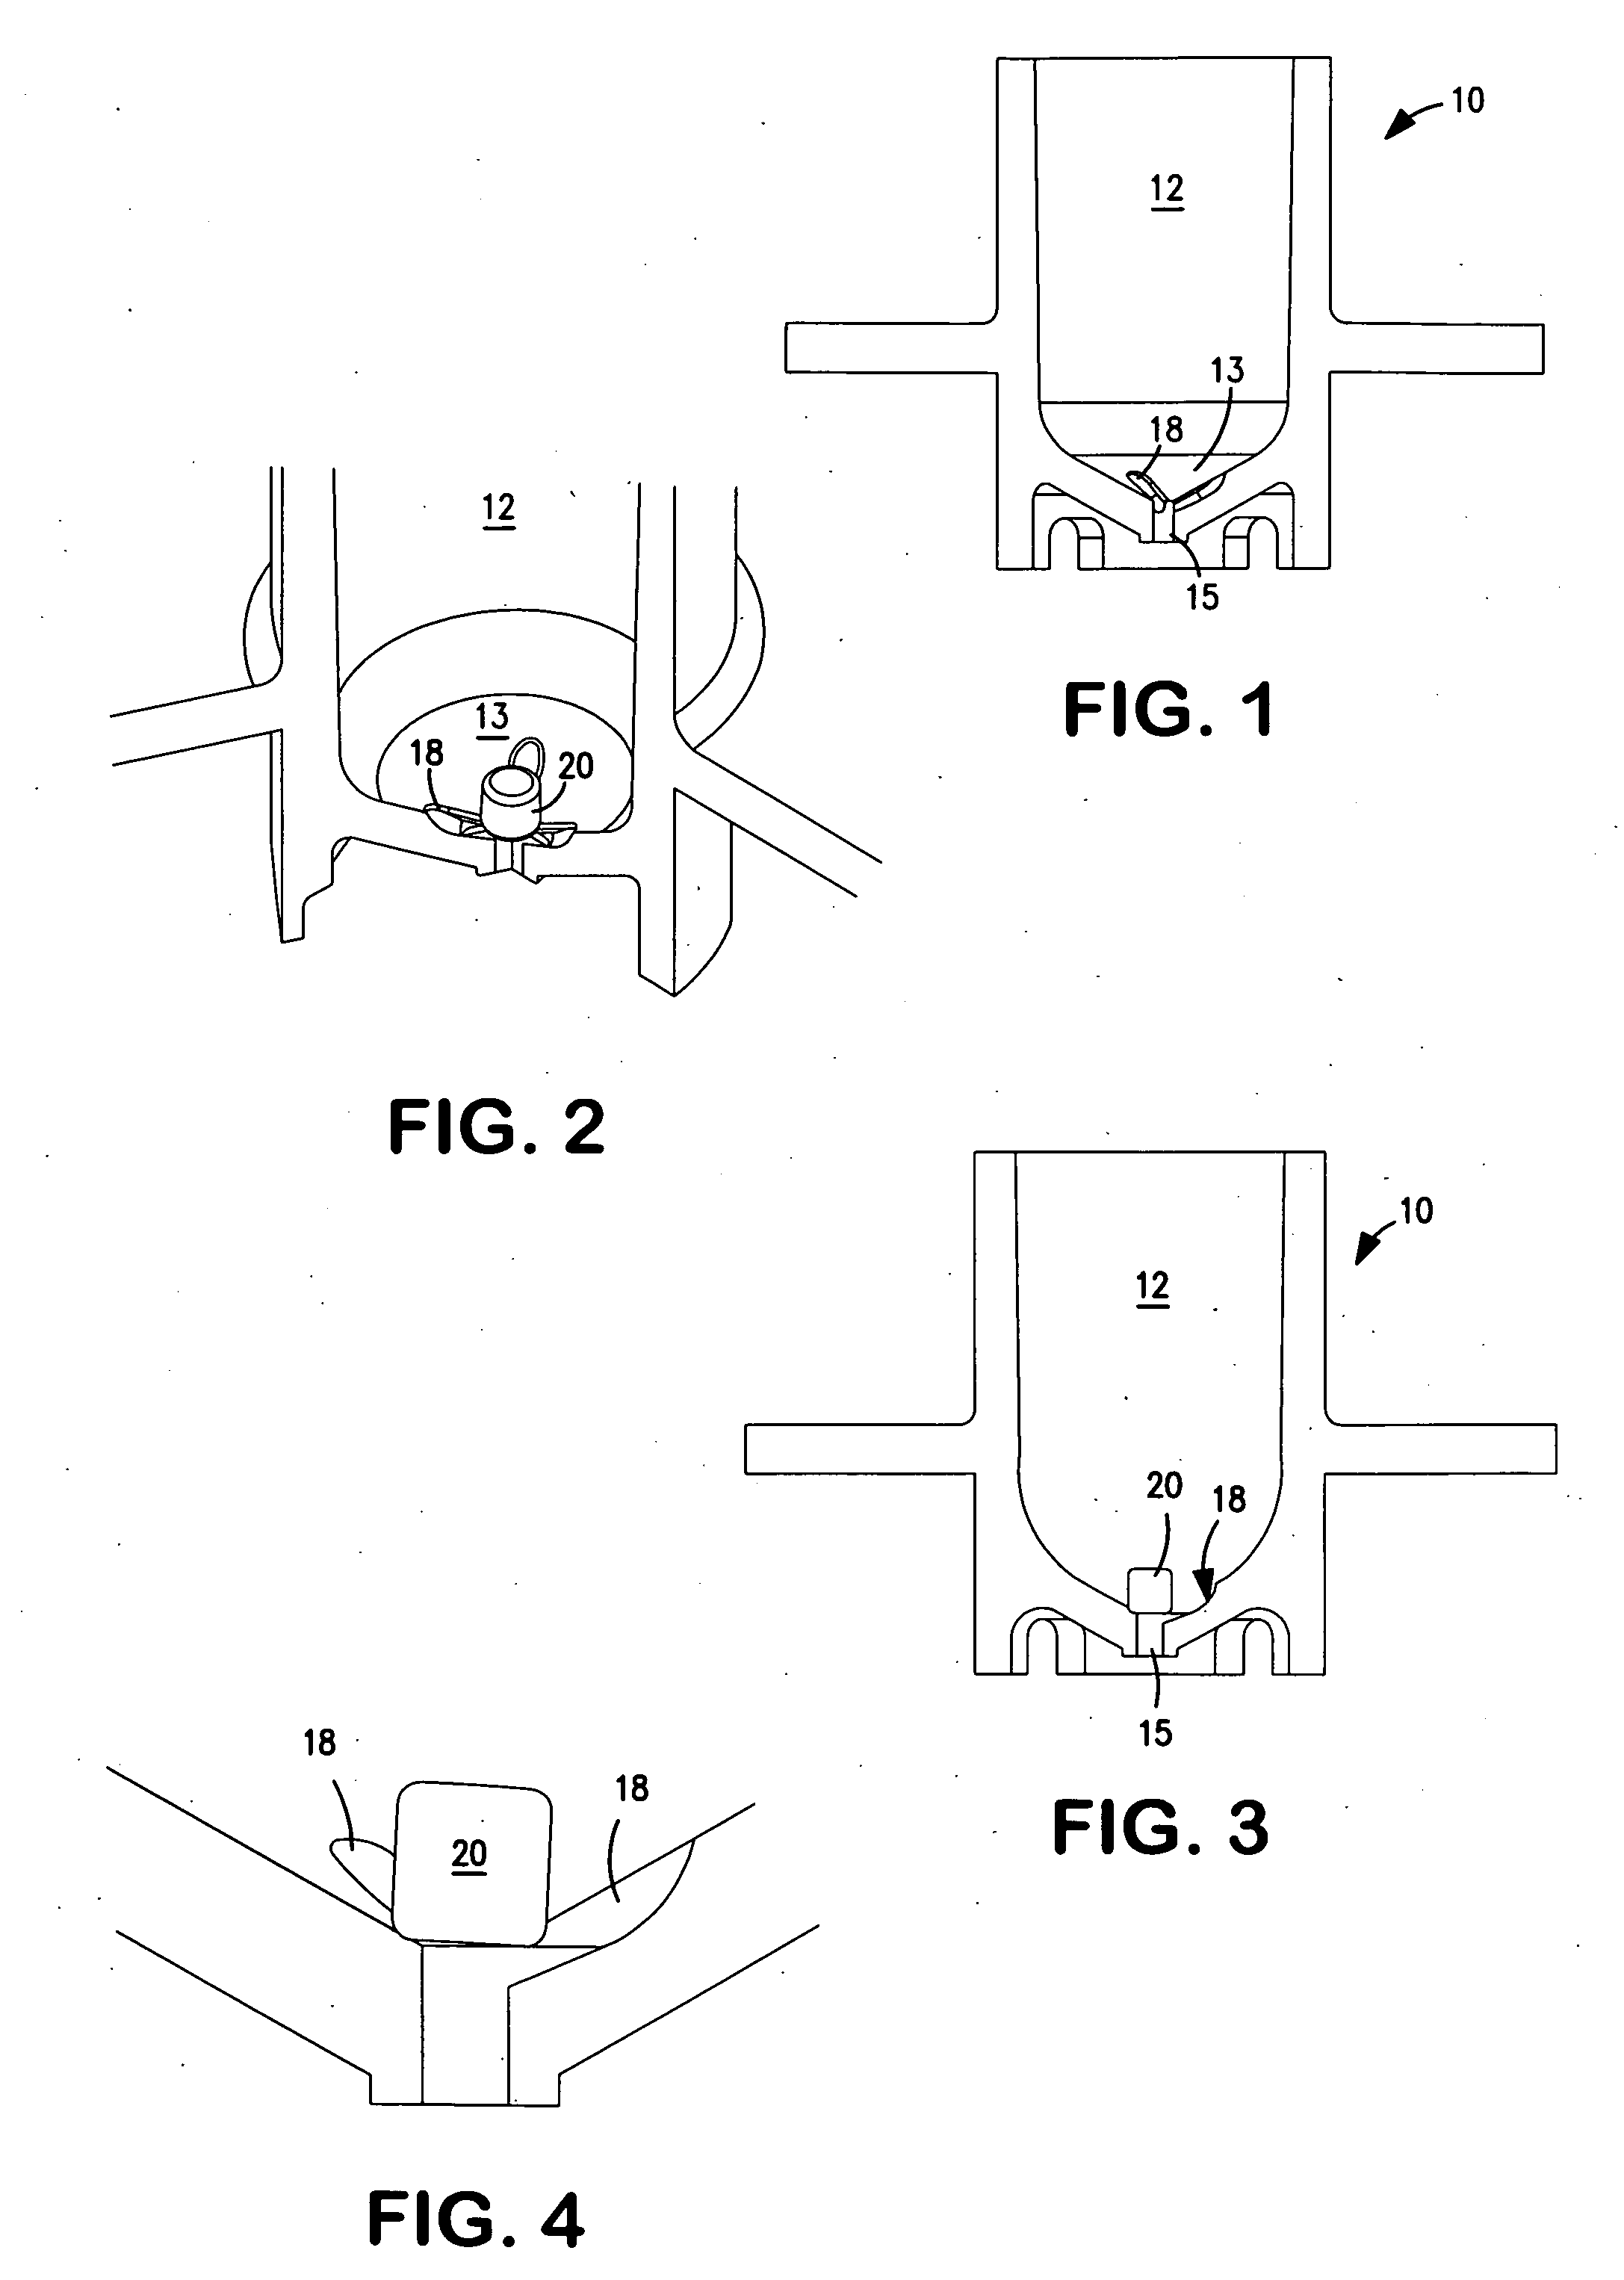 Anti-clogging device and method for in-gel digestion applications